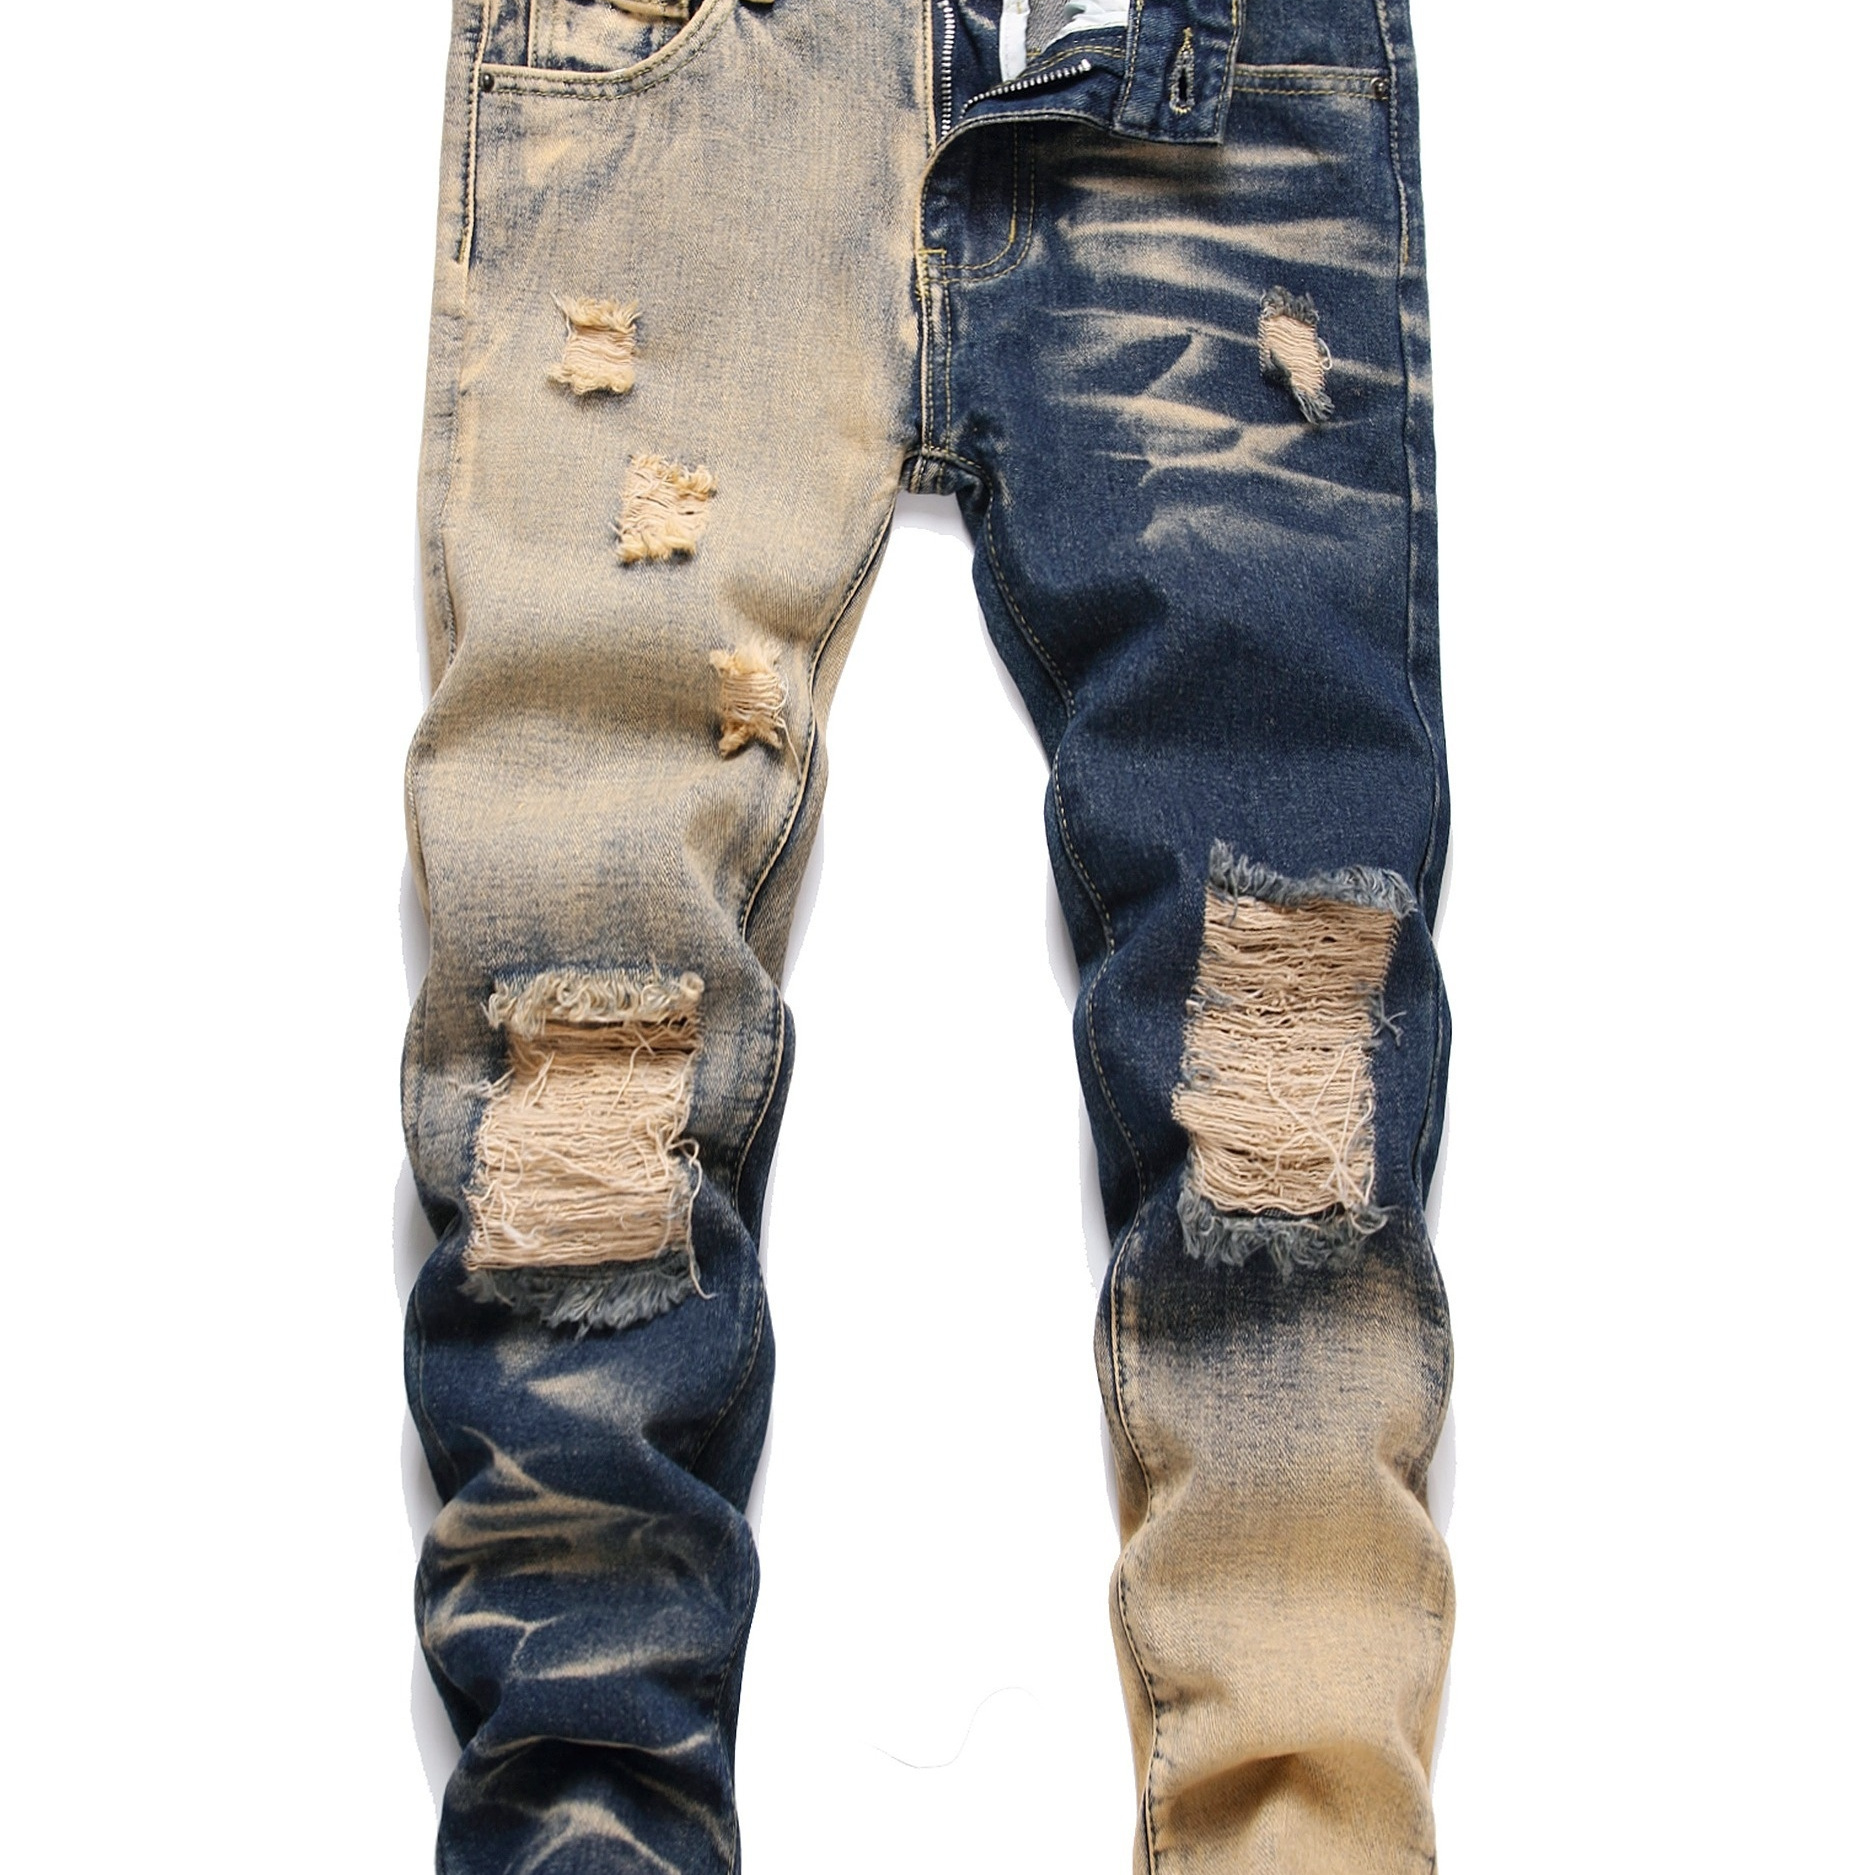 

Kid's Color Gradient Ripped Jeans, Denim Pants With Pockets, Boy's Clothes For Spring Fall